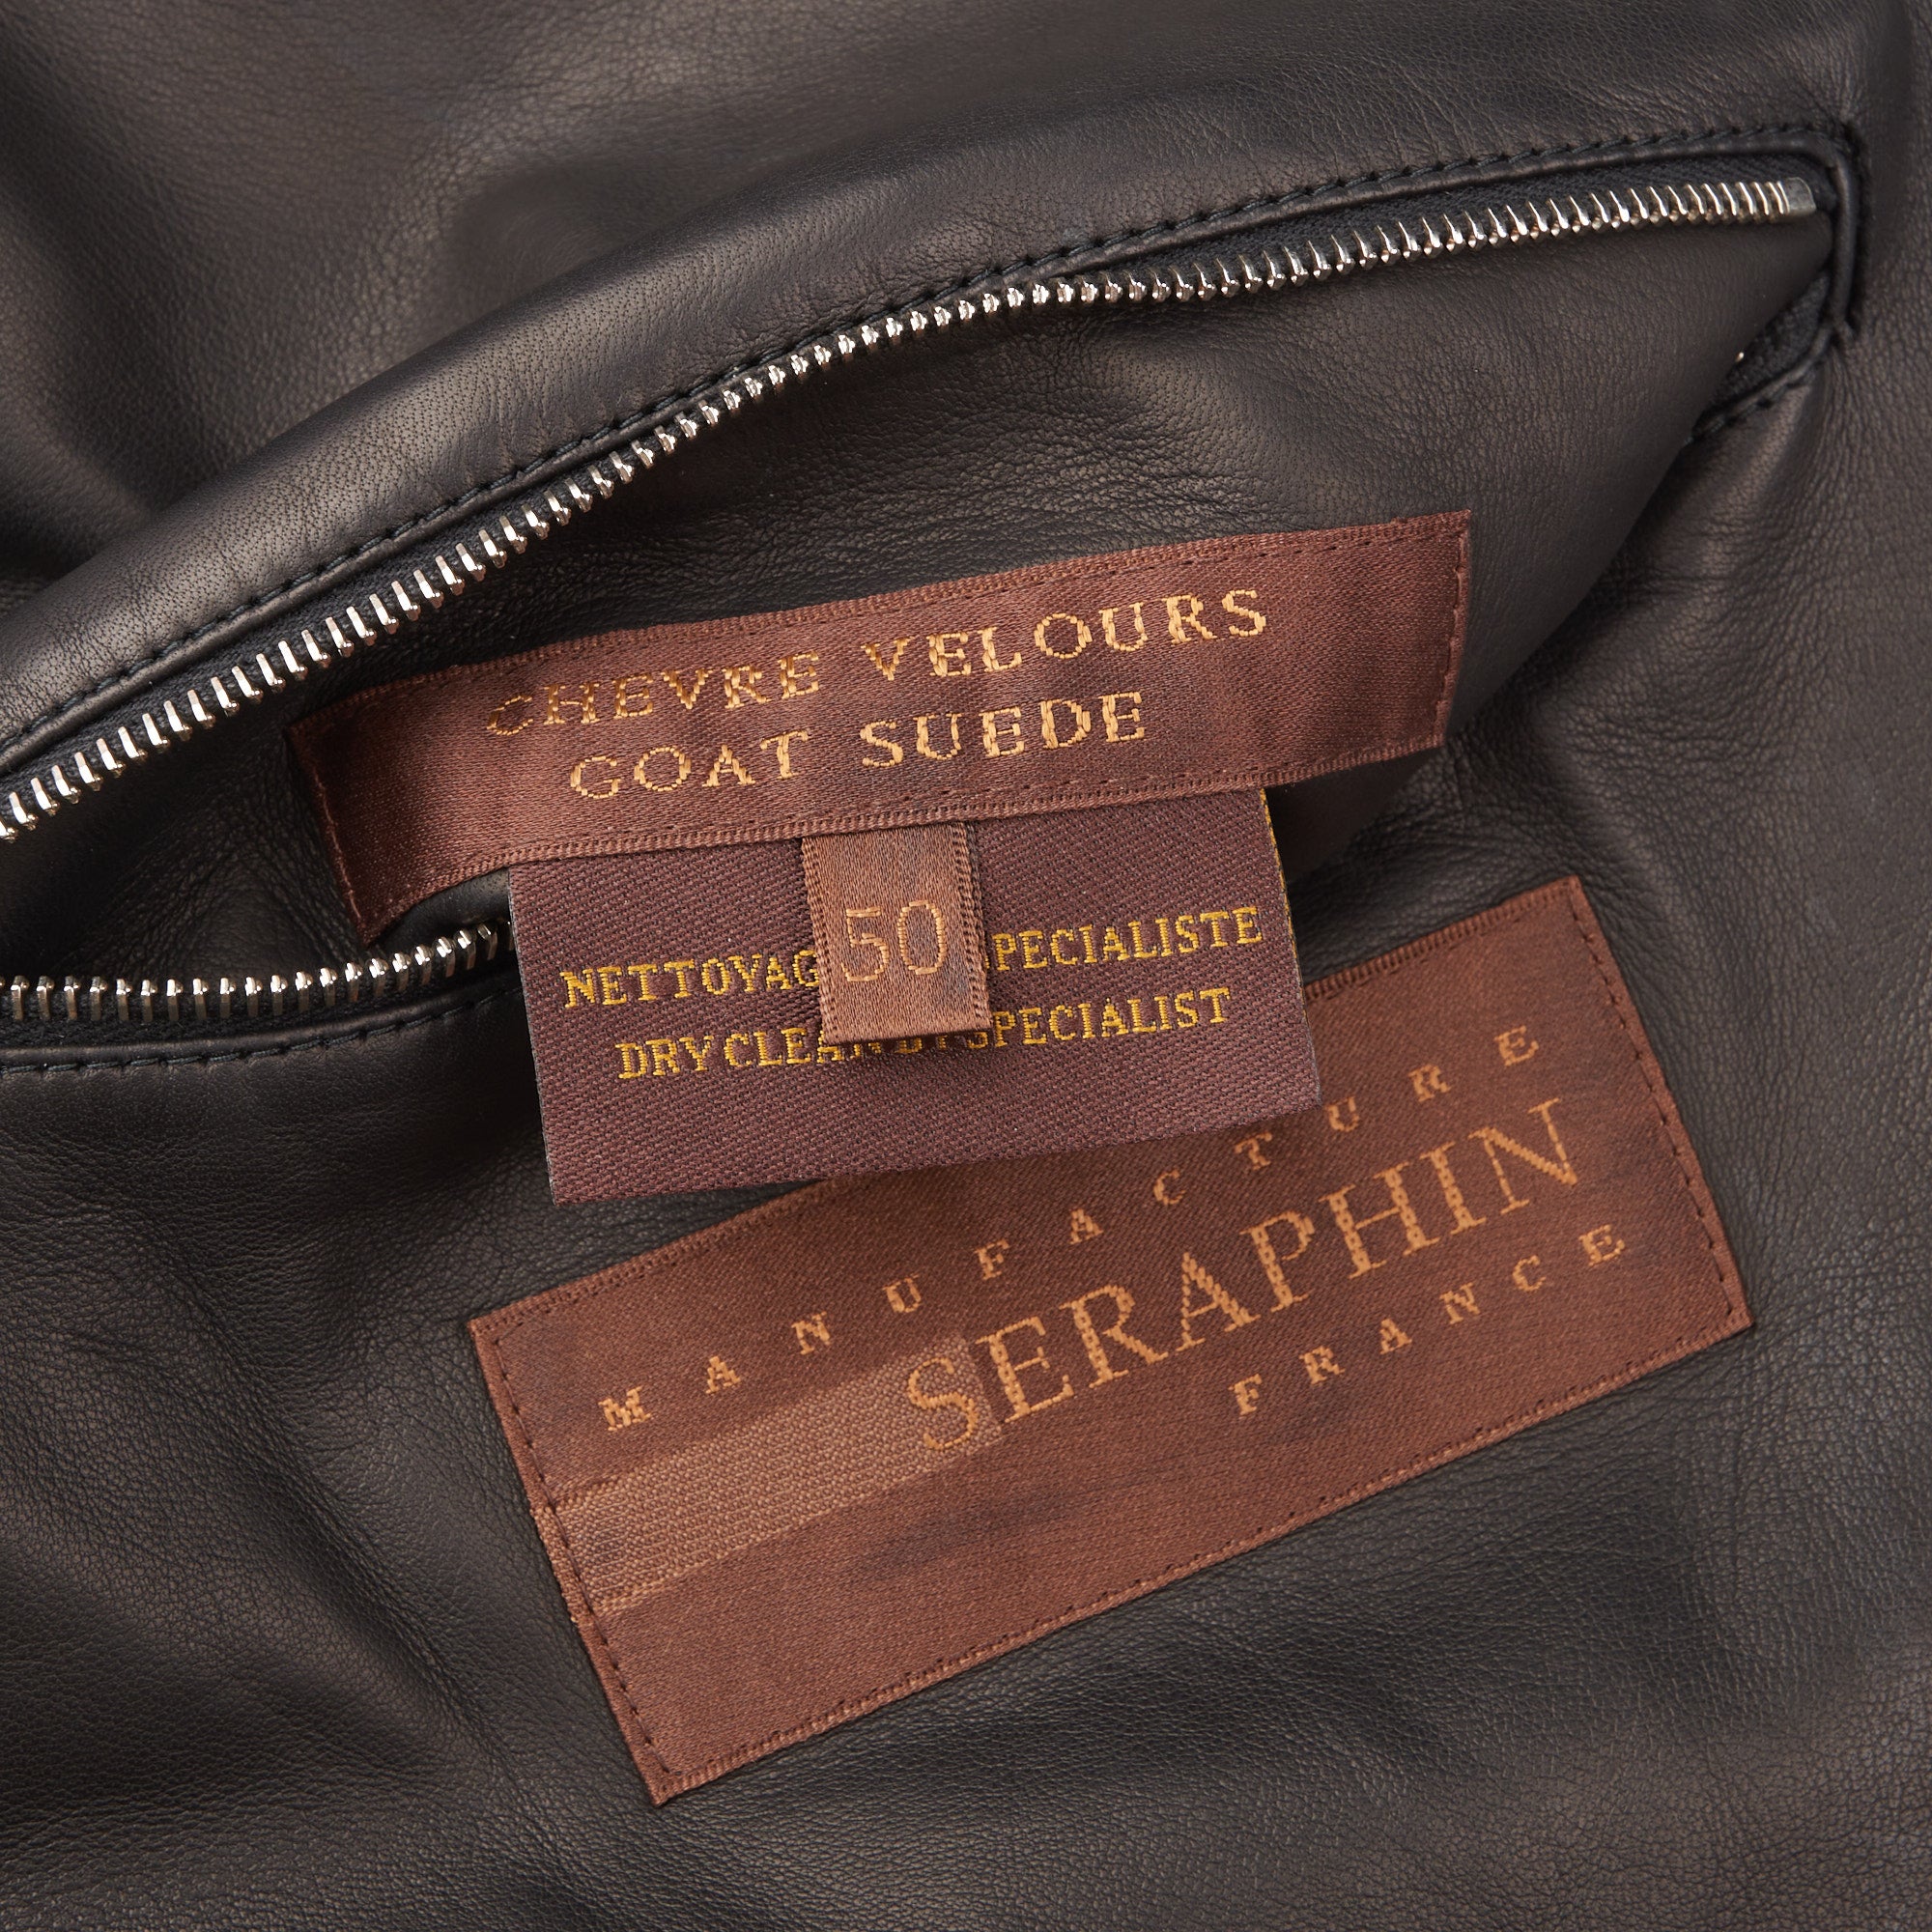 SERAPHIN Slate Brown Suede Calf Leather Unlined Cafe Racer Biker Jacket FR 50 NEW US M SERAPHIN